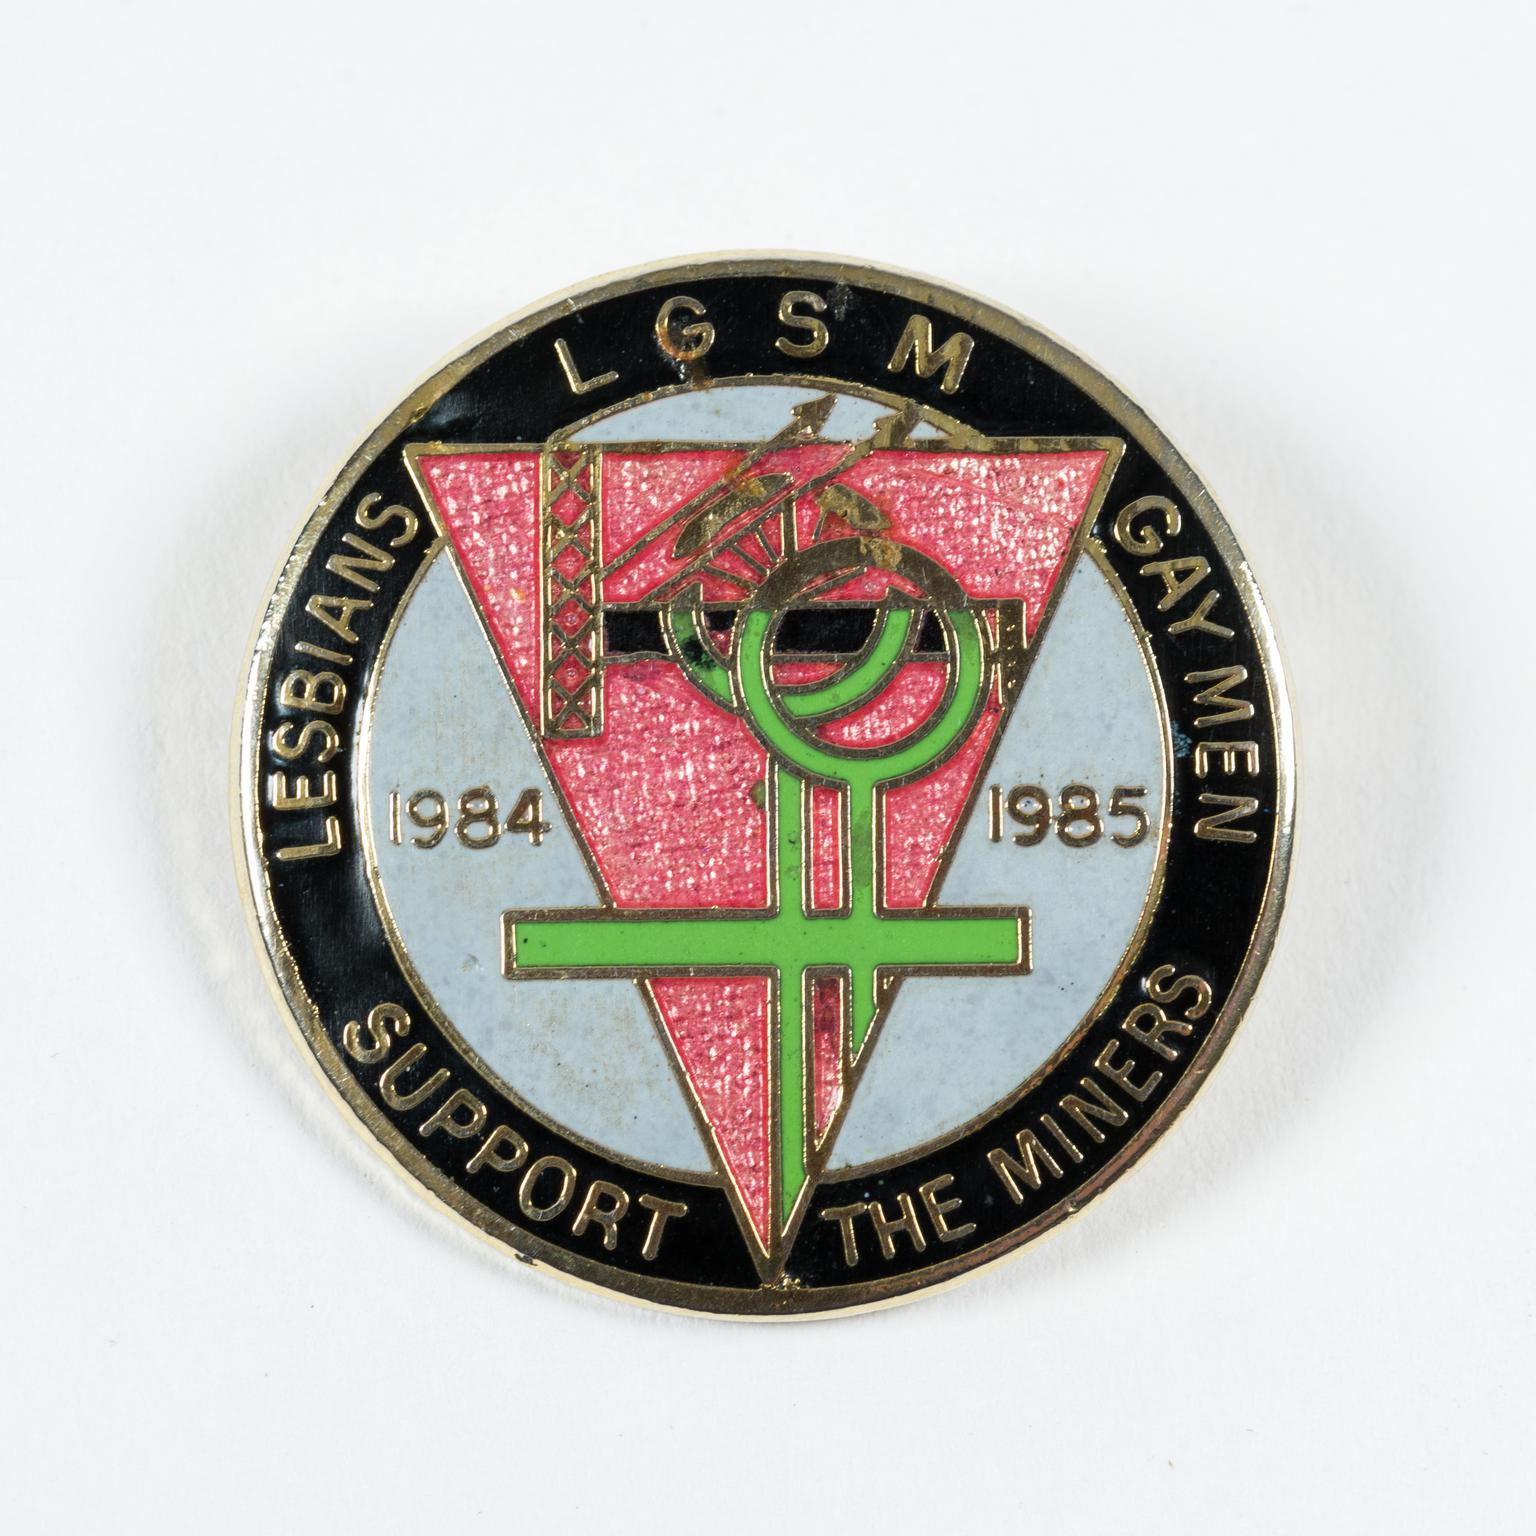 Lesbians & Gay Men Support the Miners, badge